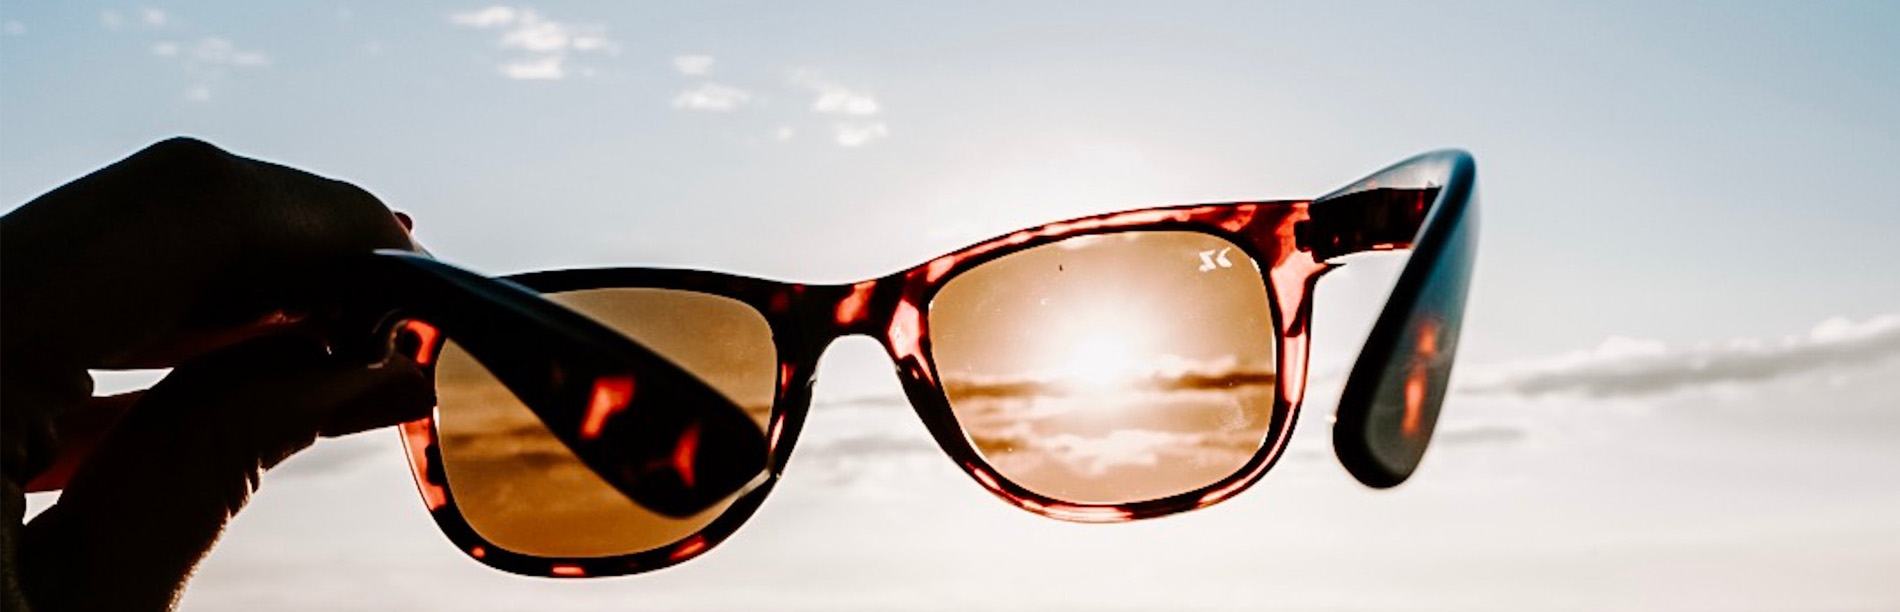 Sunglasses Lens Technology Banner. Sunglasses held up to the sun.